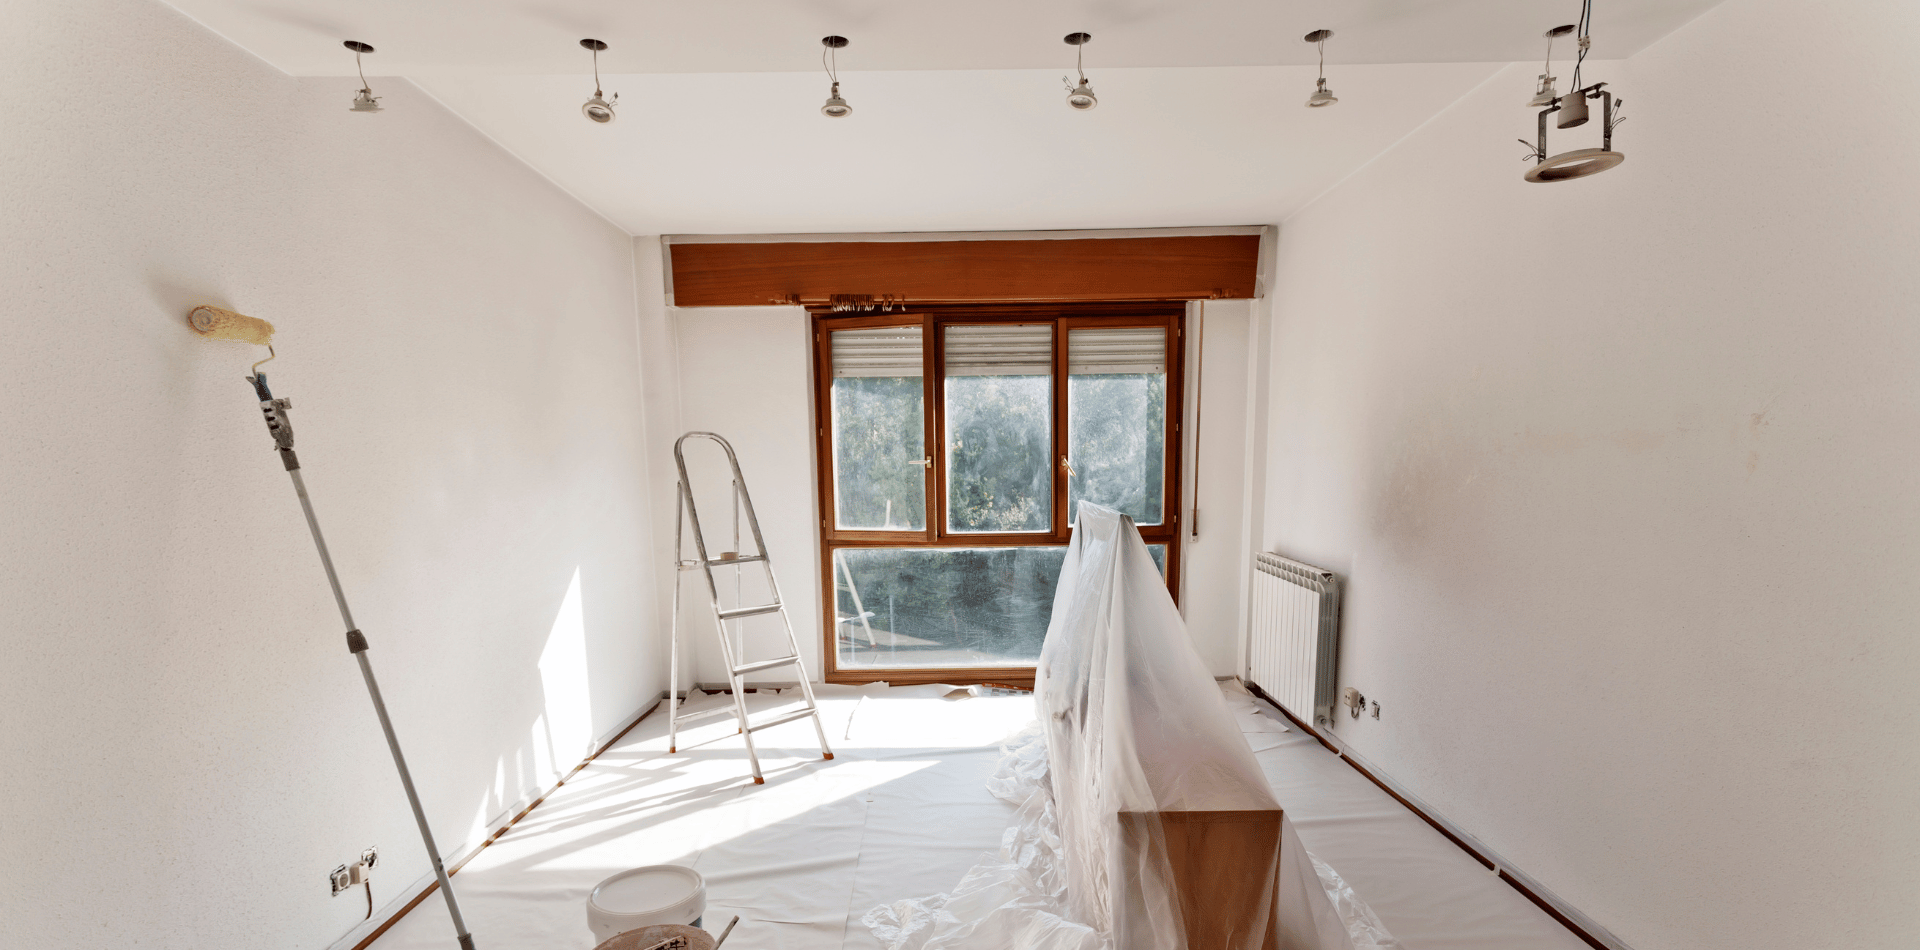 A room prepared for painting